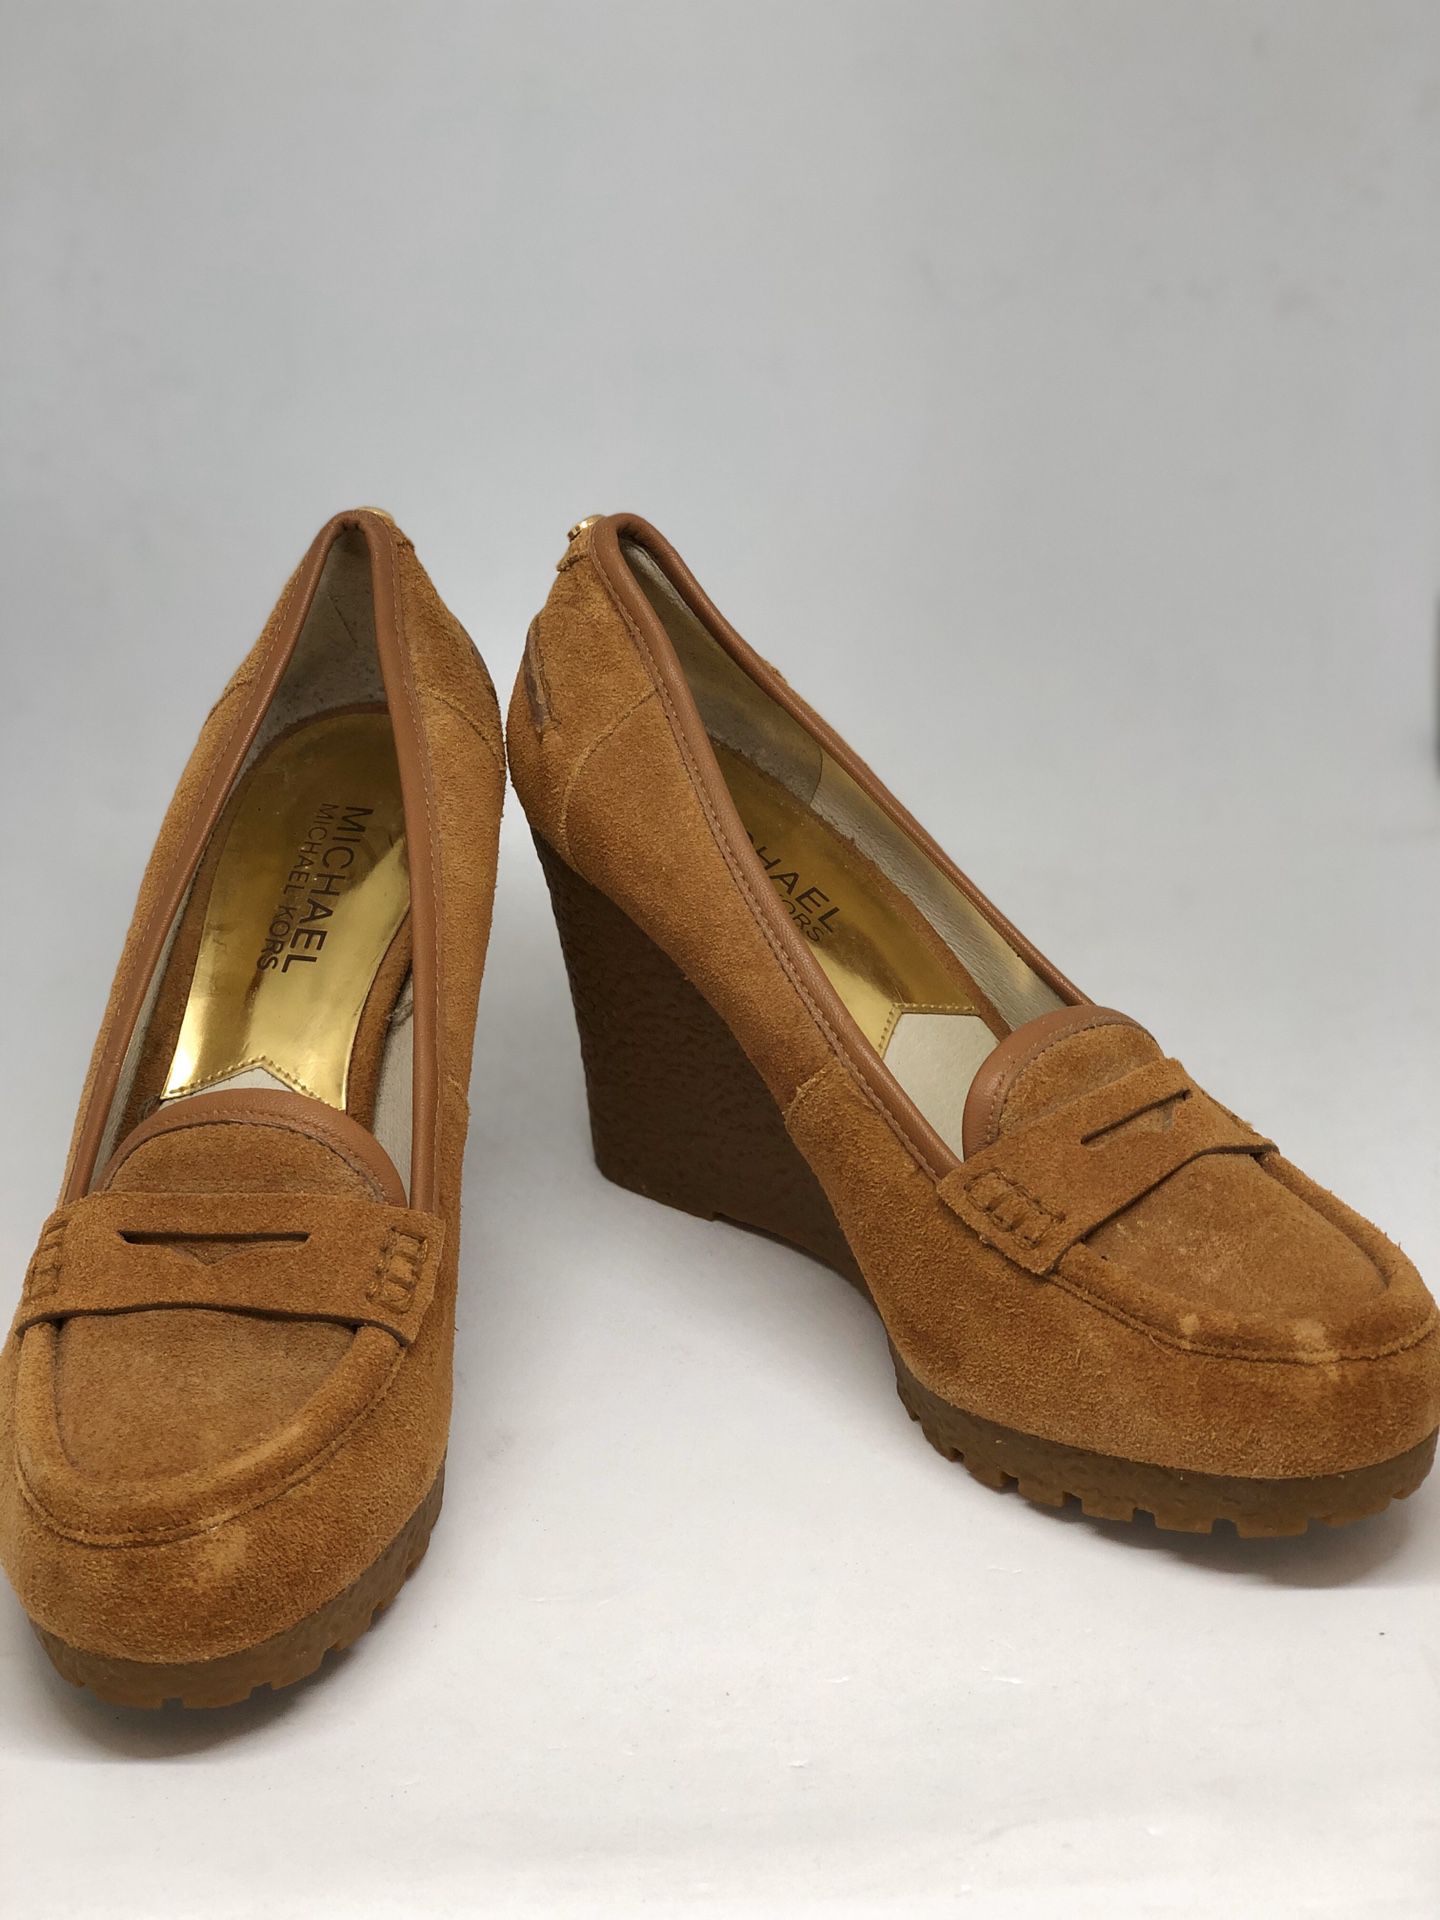 BRAND NEW 🔥 Michael Michael Kors Rory Wedge Loafers